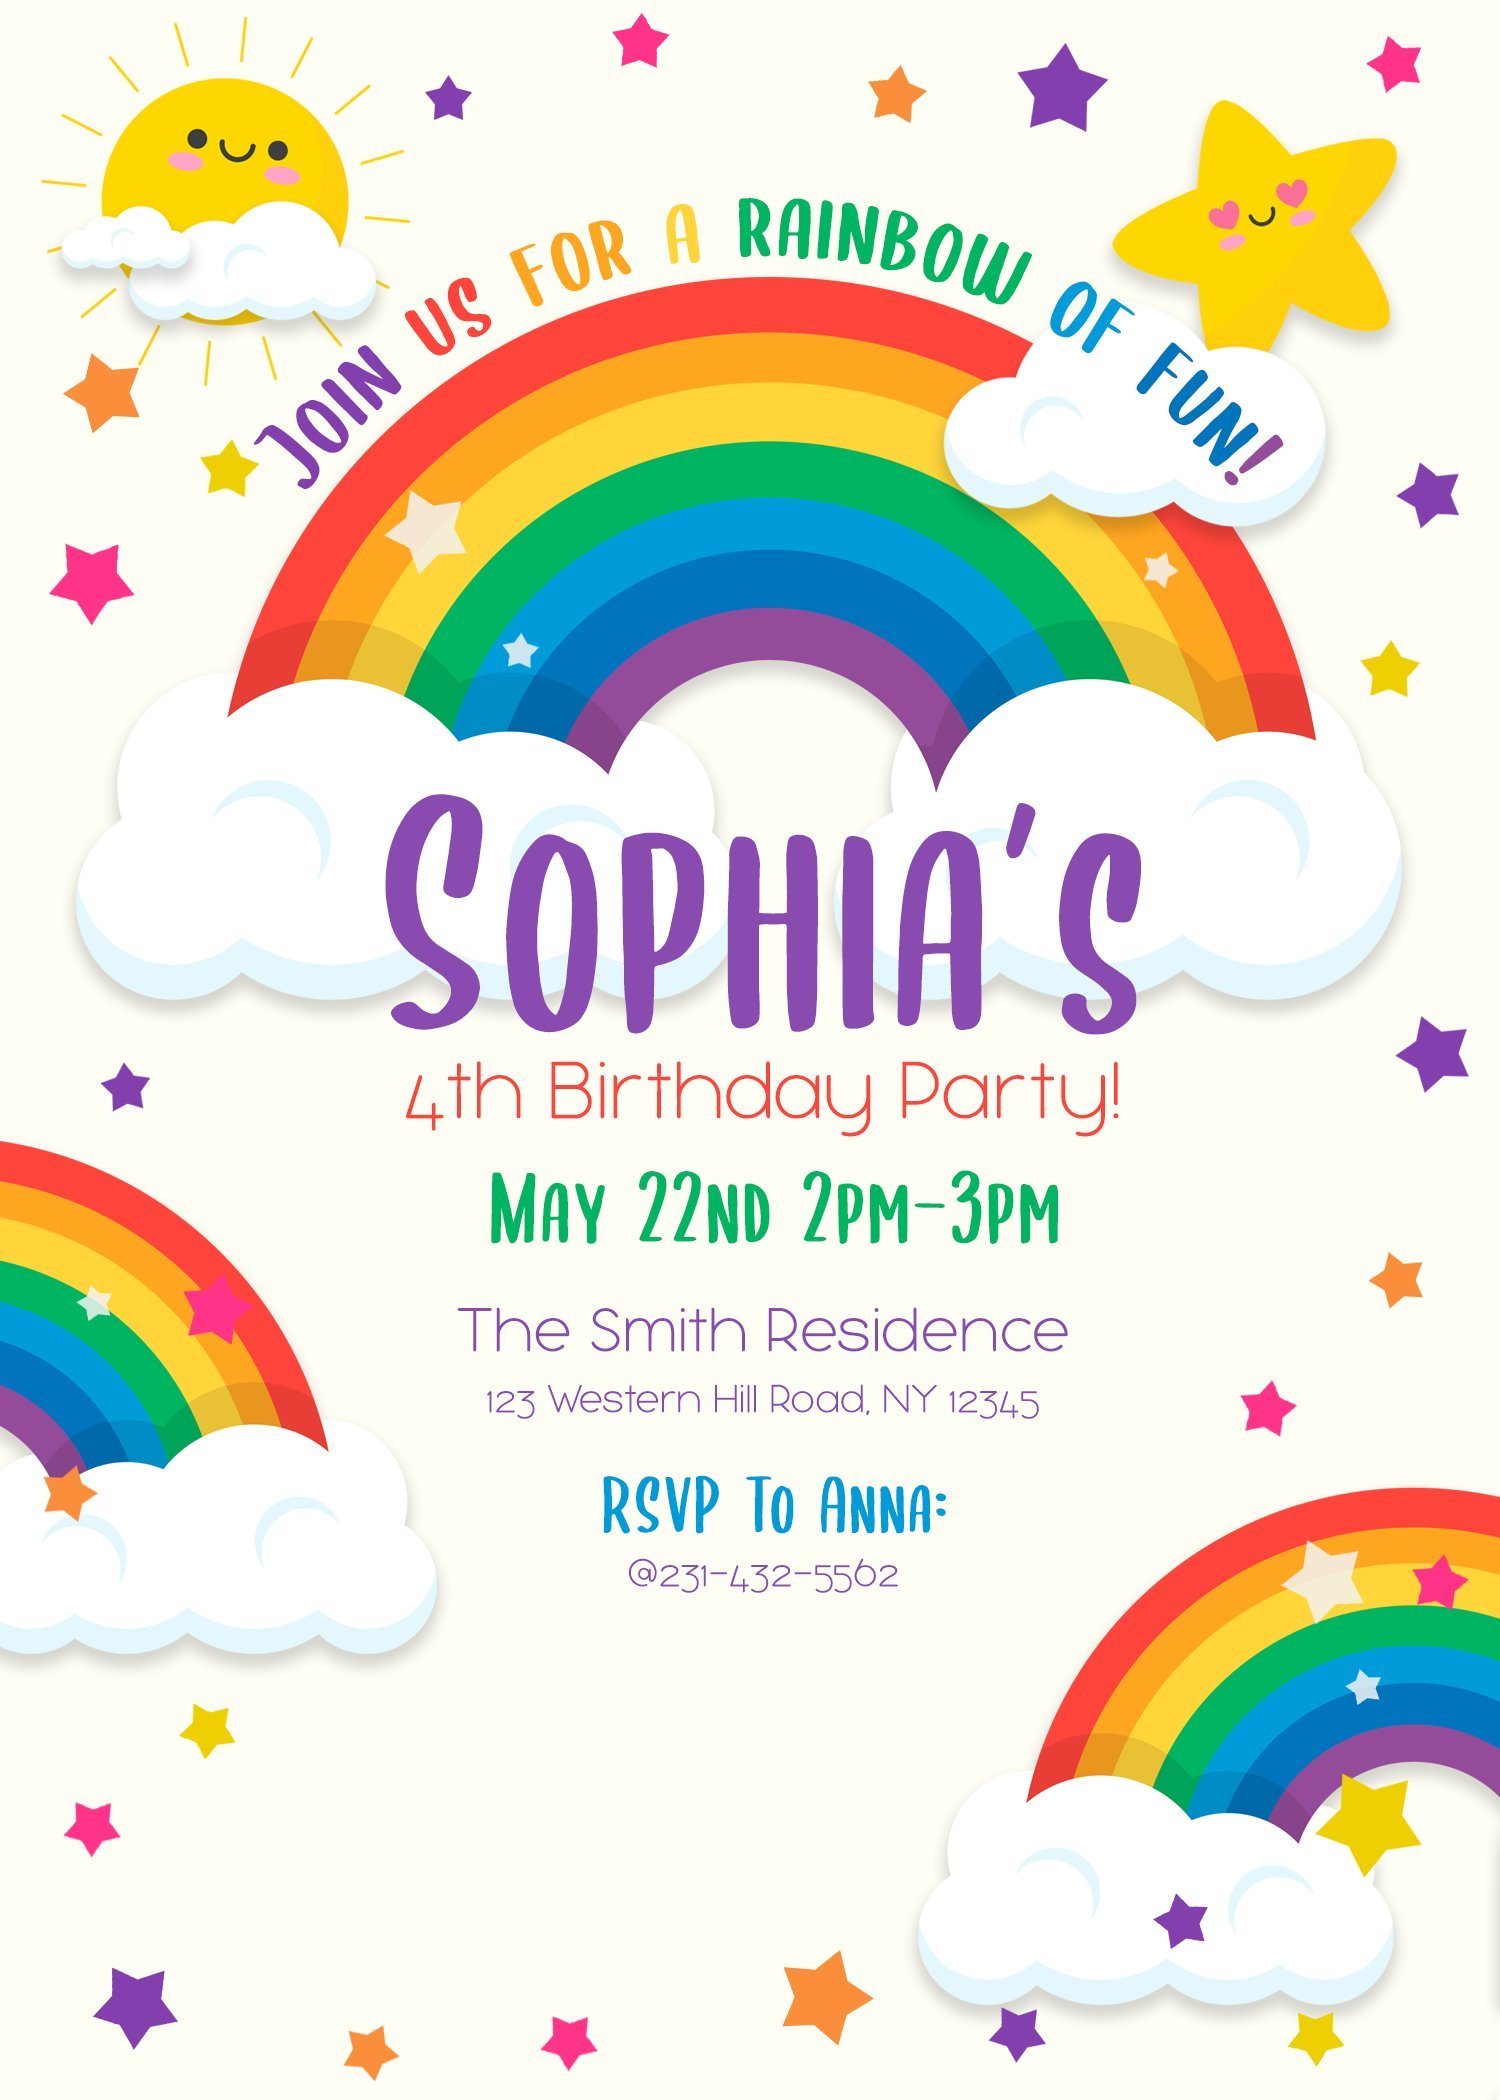 9-colorful-rainbow-invitation-card-templates-for-your-delightful